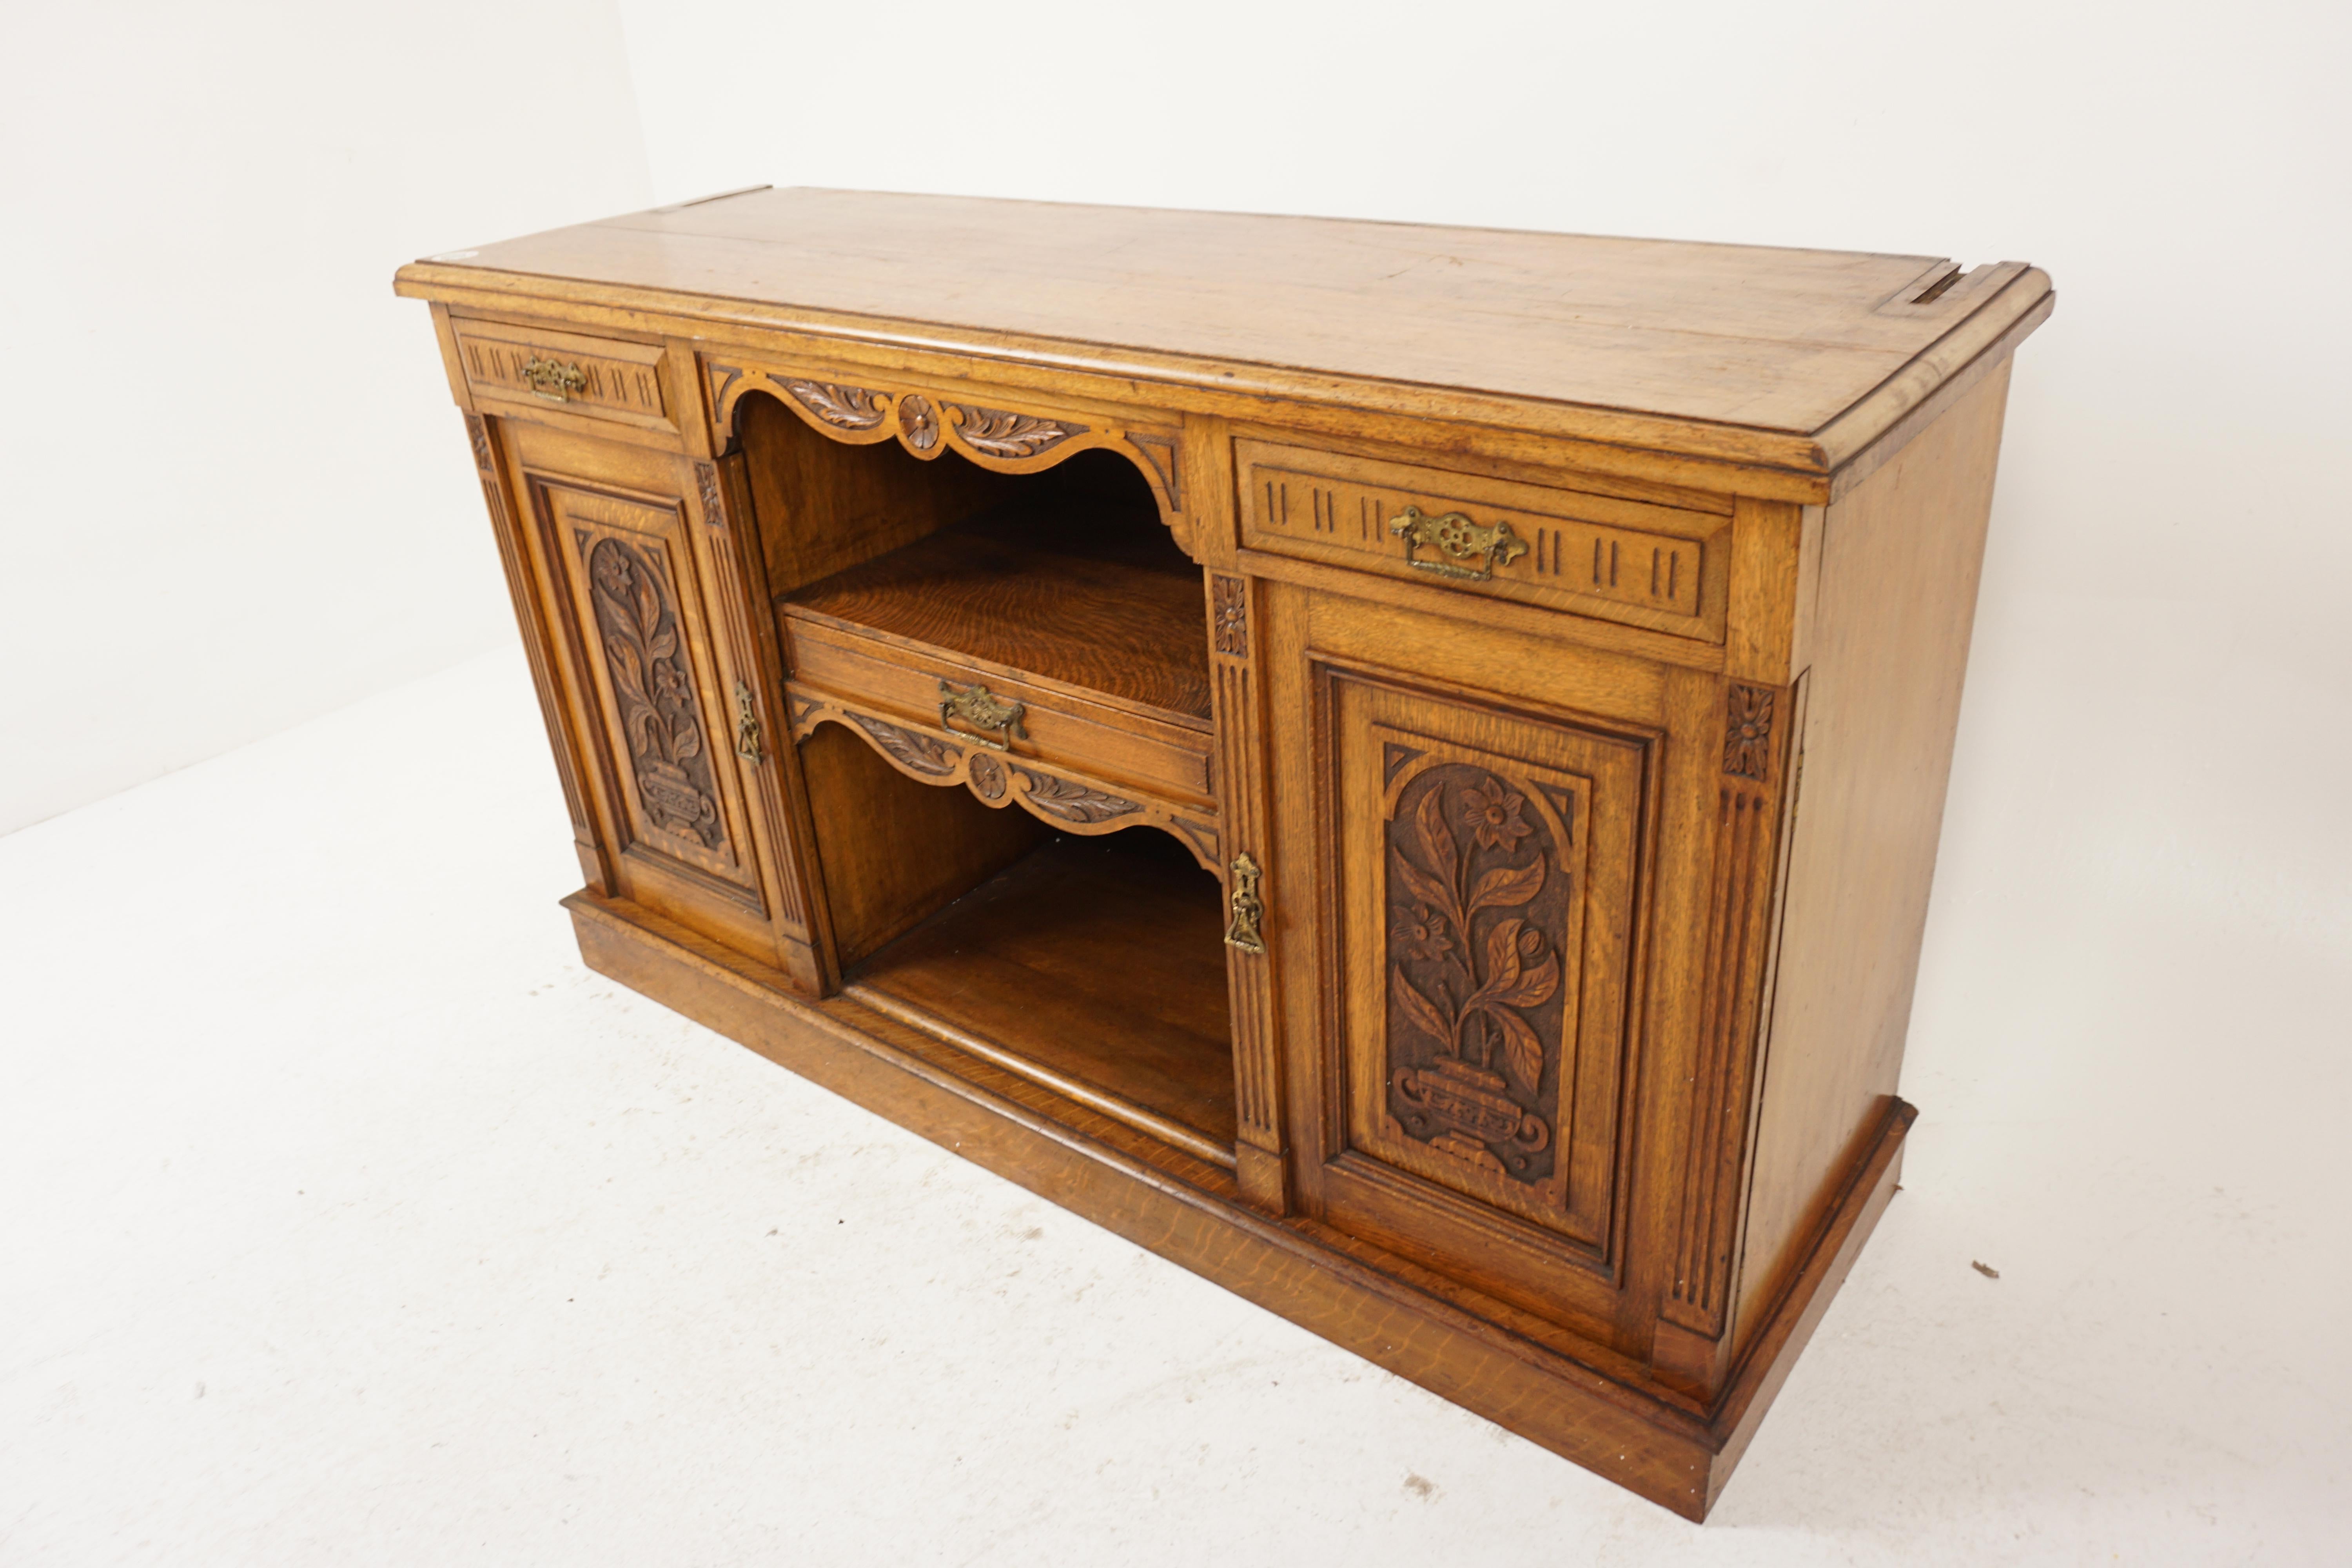 Antique Carved Oak Sideboard, Buffet, Server, Scotland 1880, H644

Scotland 1880
Solid Oak
Original finish
Rectangular moulded top
Pair of carved drawers
Single carved drawer in the center with open space above and below
Pair of carved doors